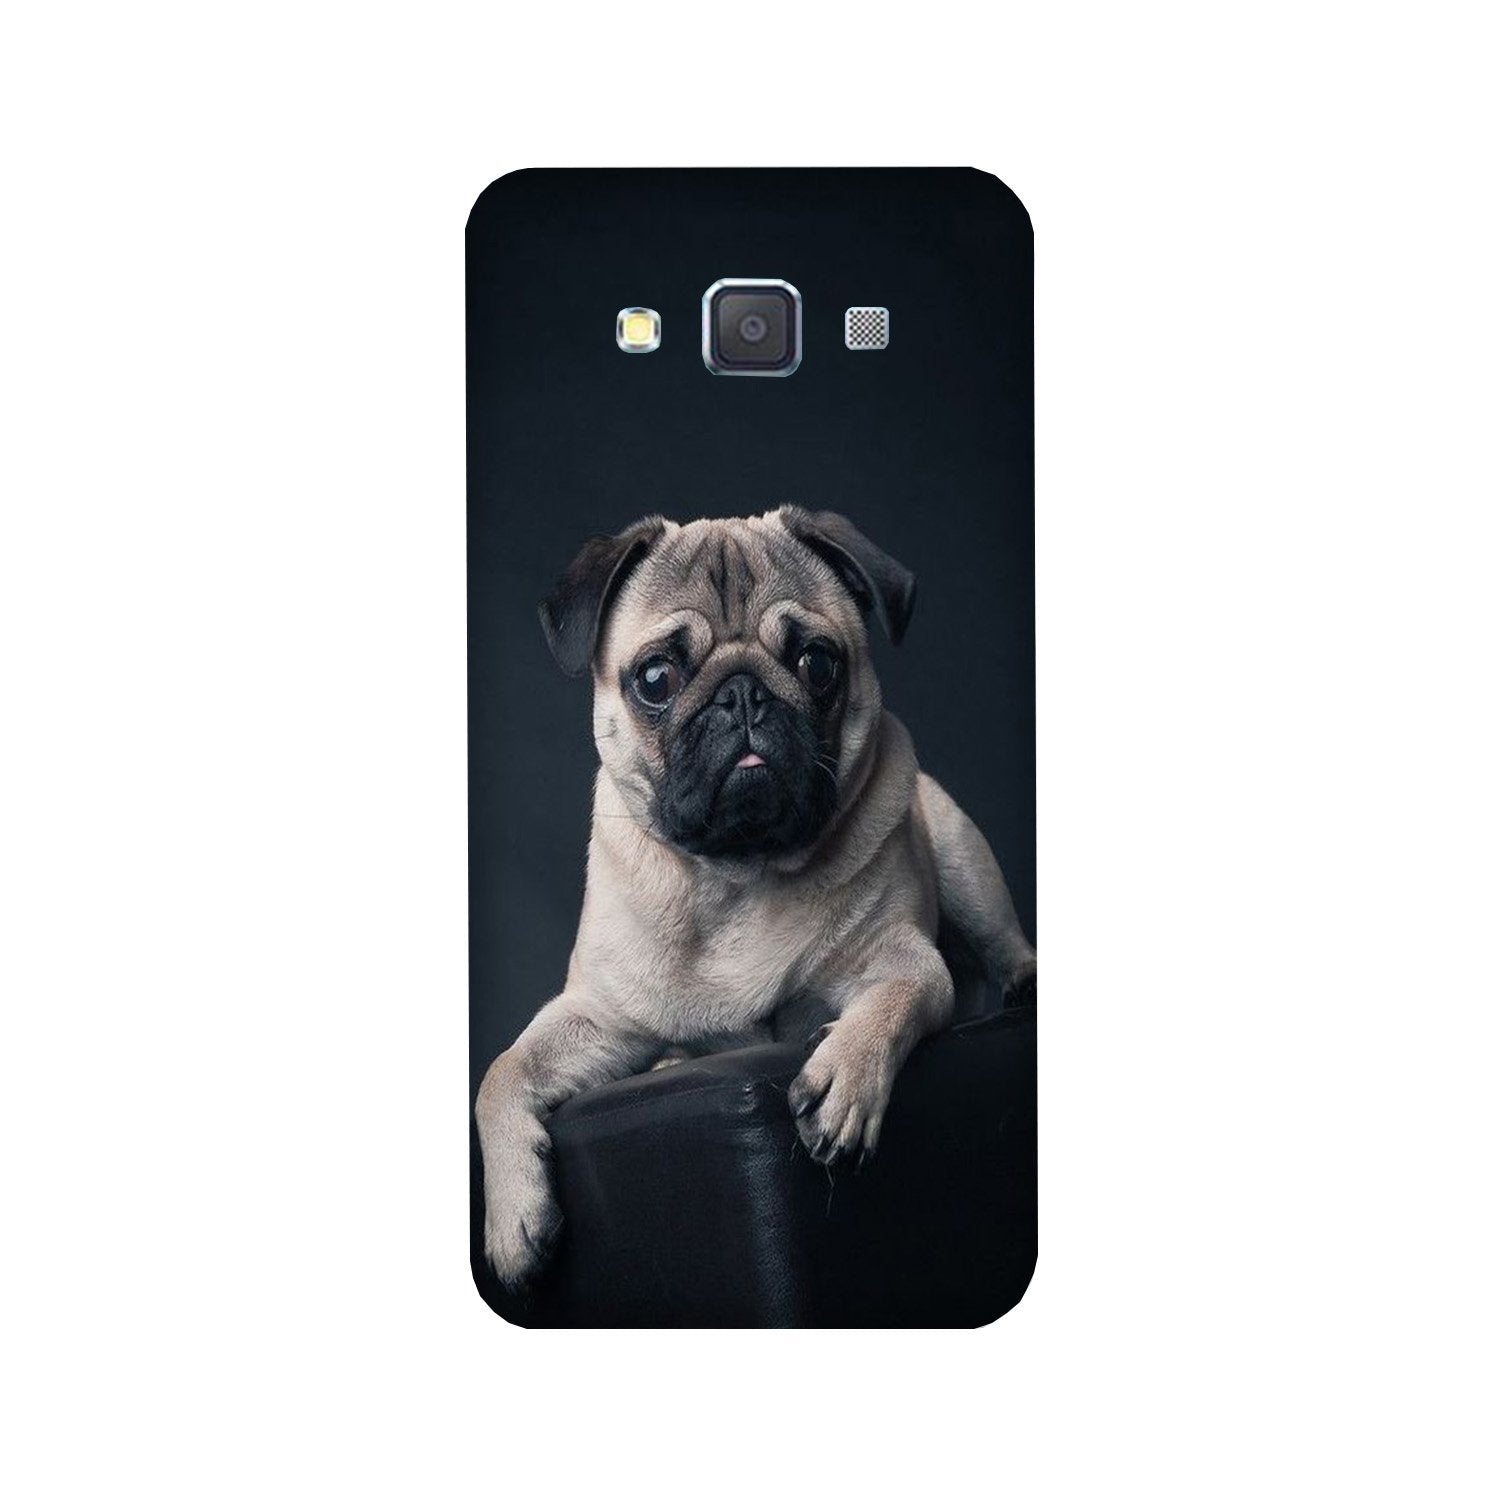 little Puppy Case for Galaxy Grand Prime